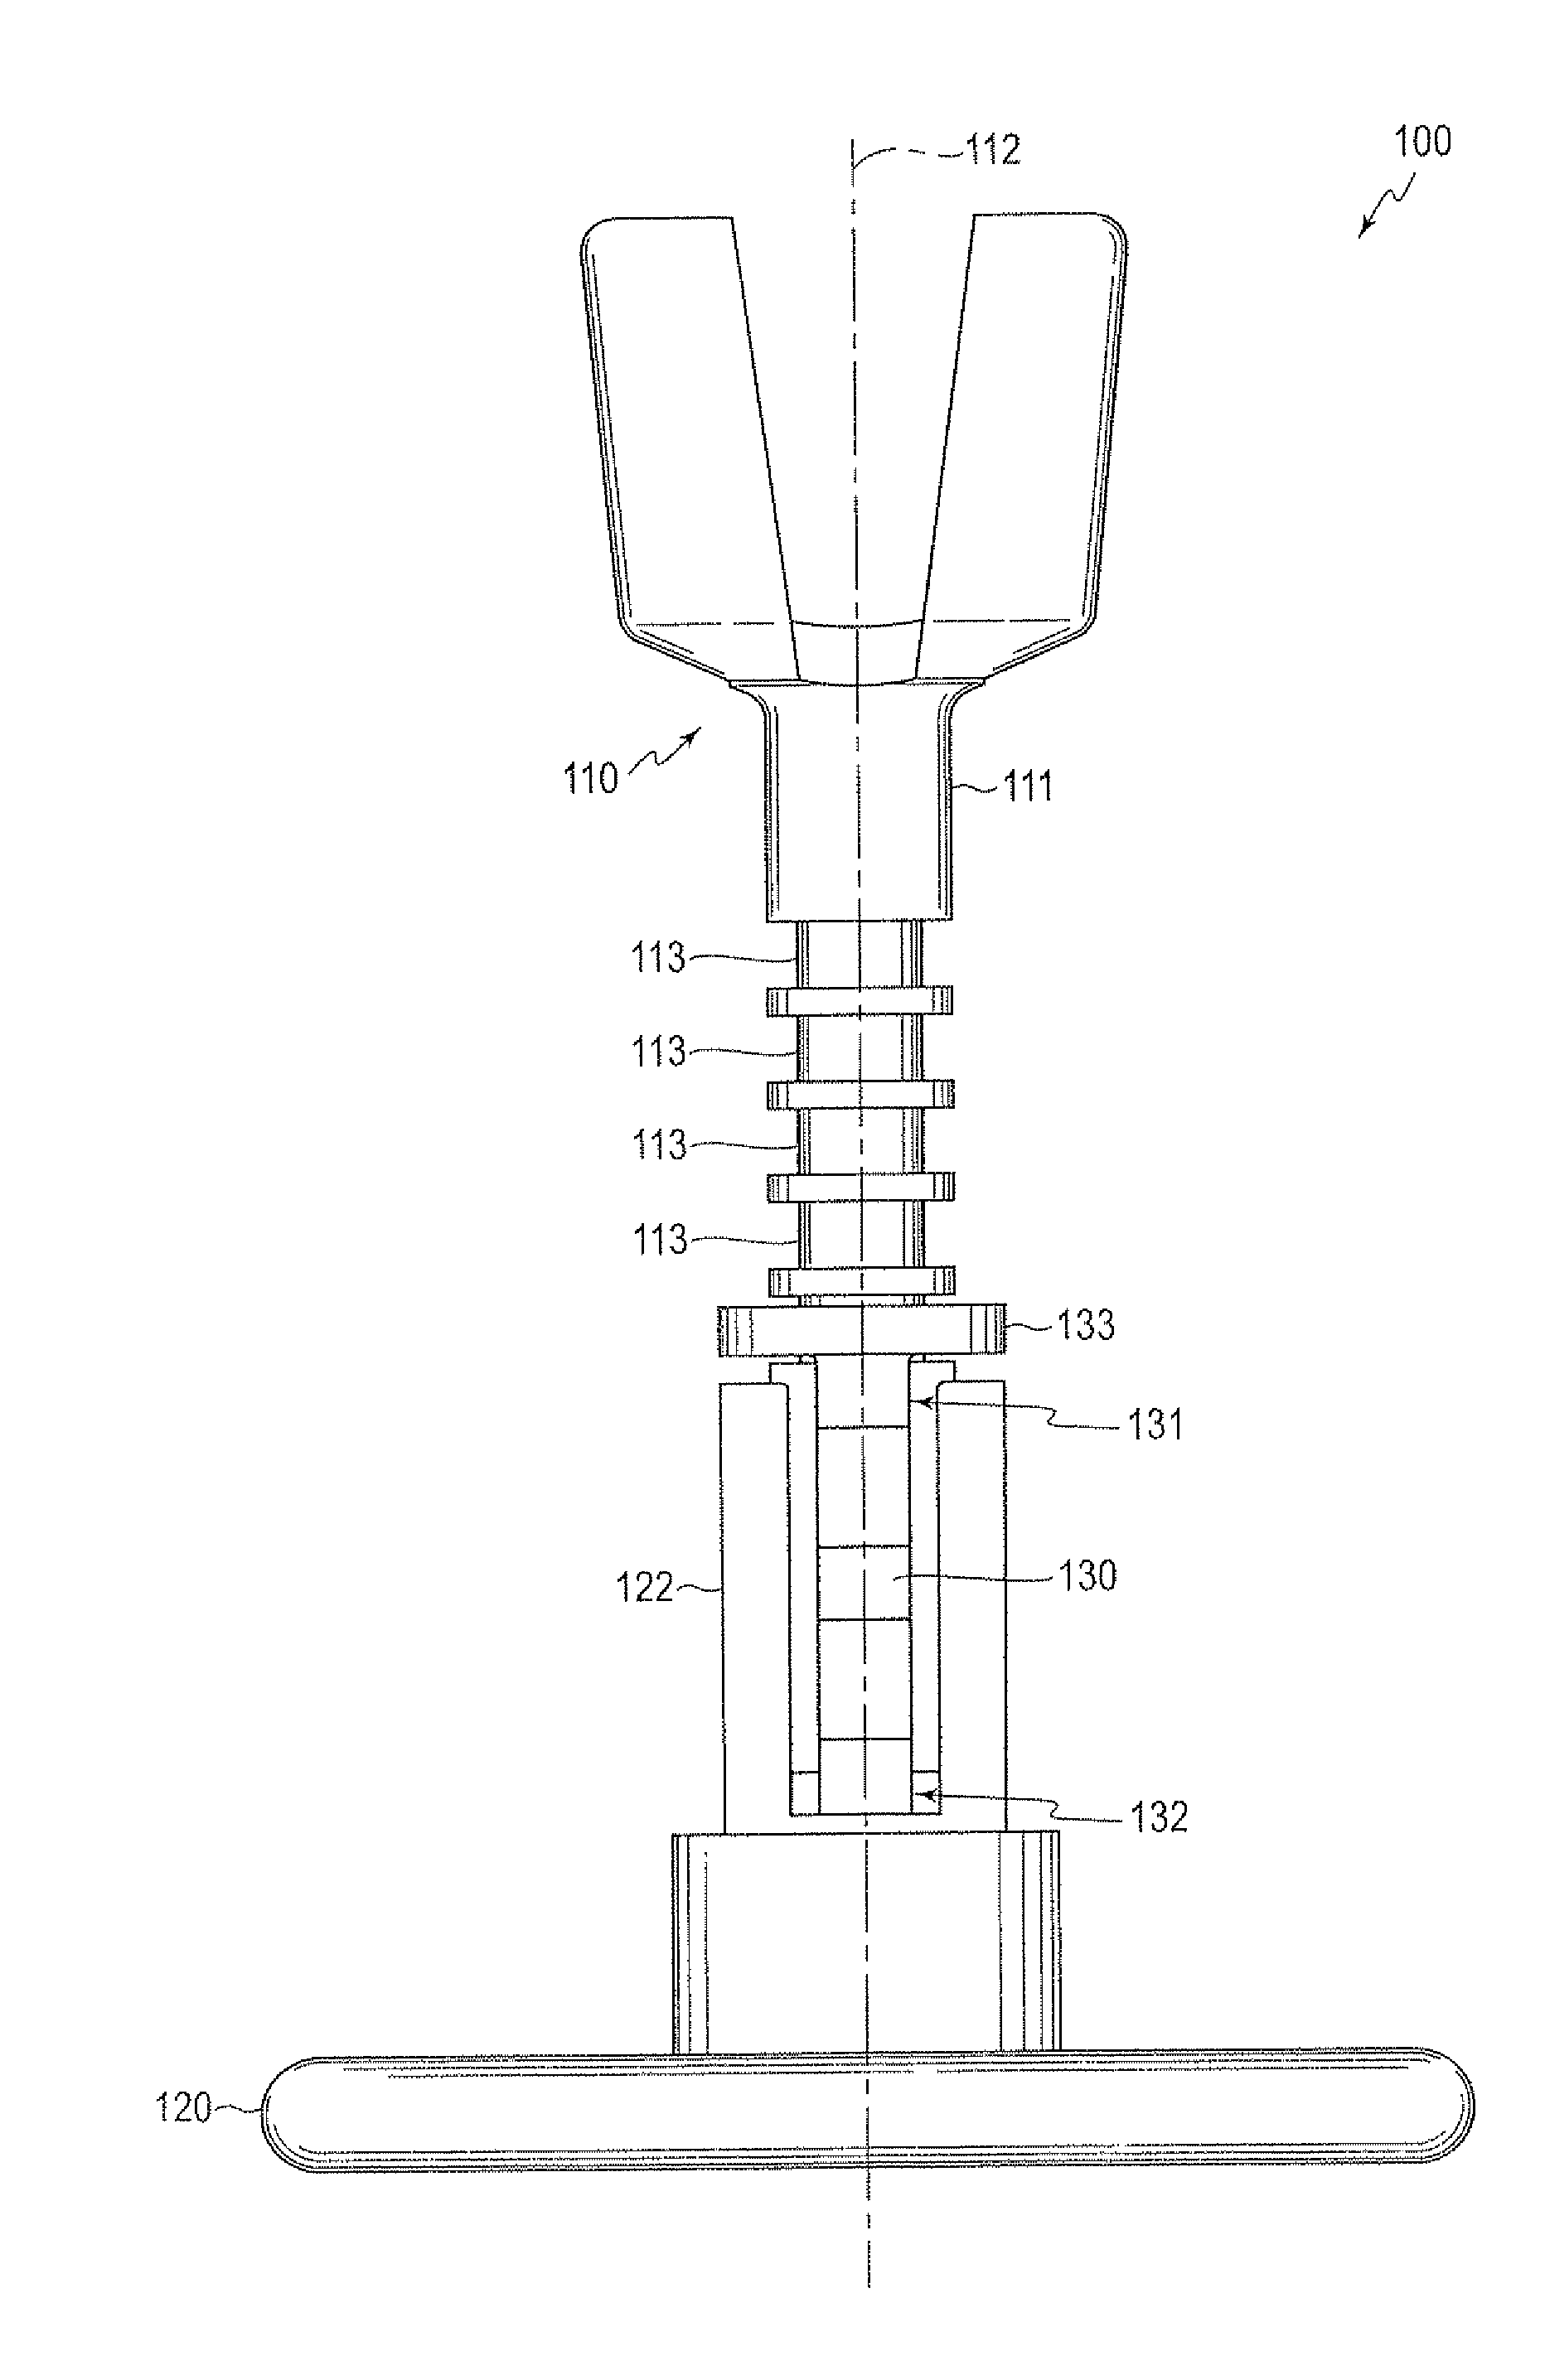 In situ adjustable ossicular implant and instrument for implanting and adjusting an adjustable ossicular implant